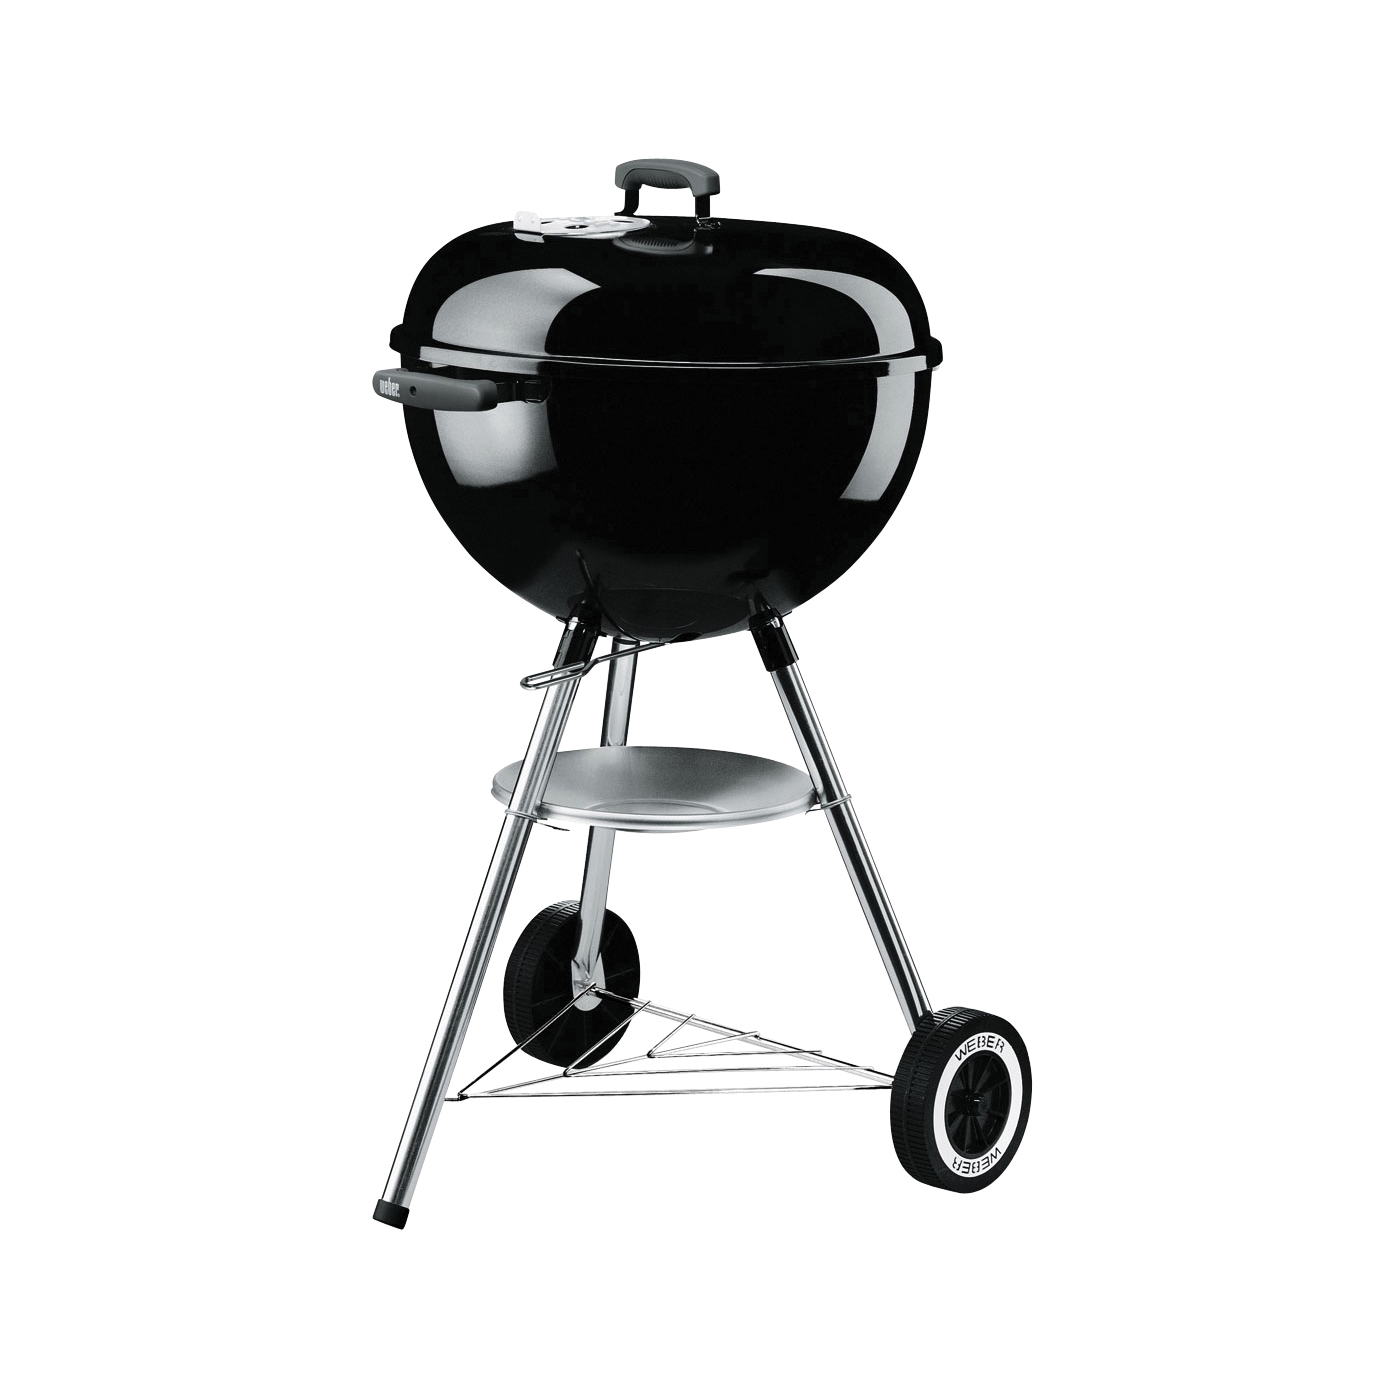 Original Kettle 441001 Charcoal Grill, 240 sq-in Primary Cooking Surface, Black